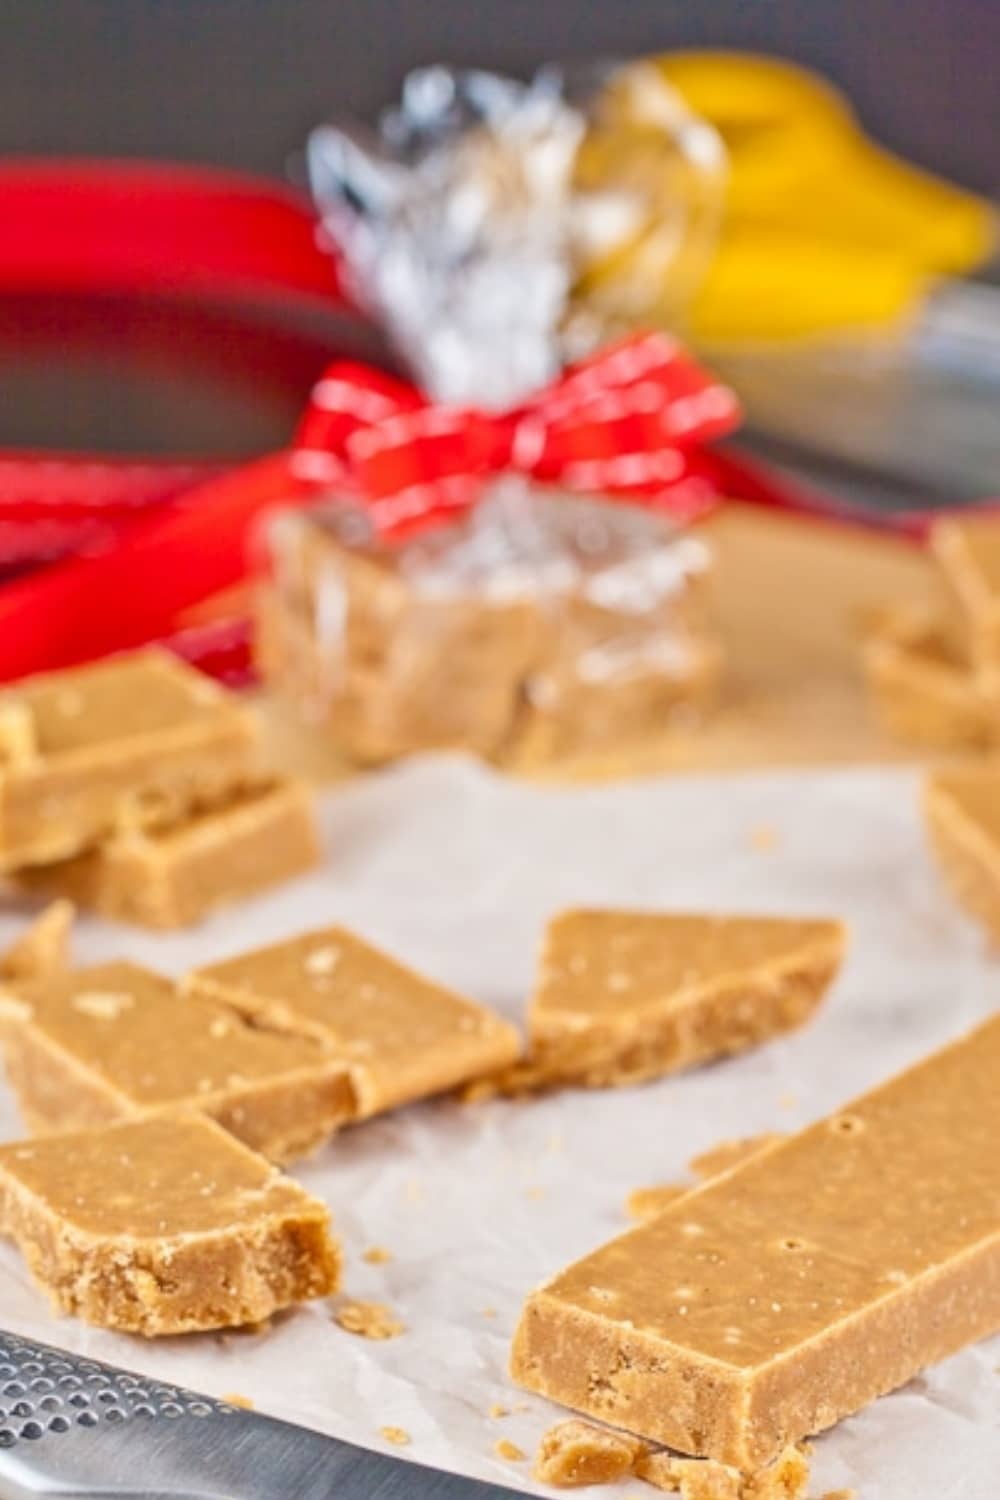 Scottish tablet is an age-old recipe for fudge 